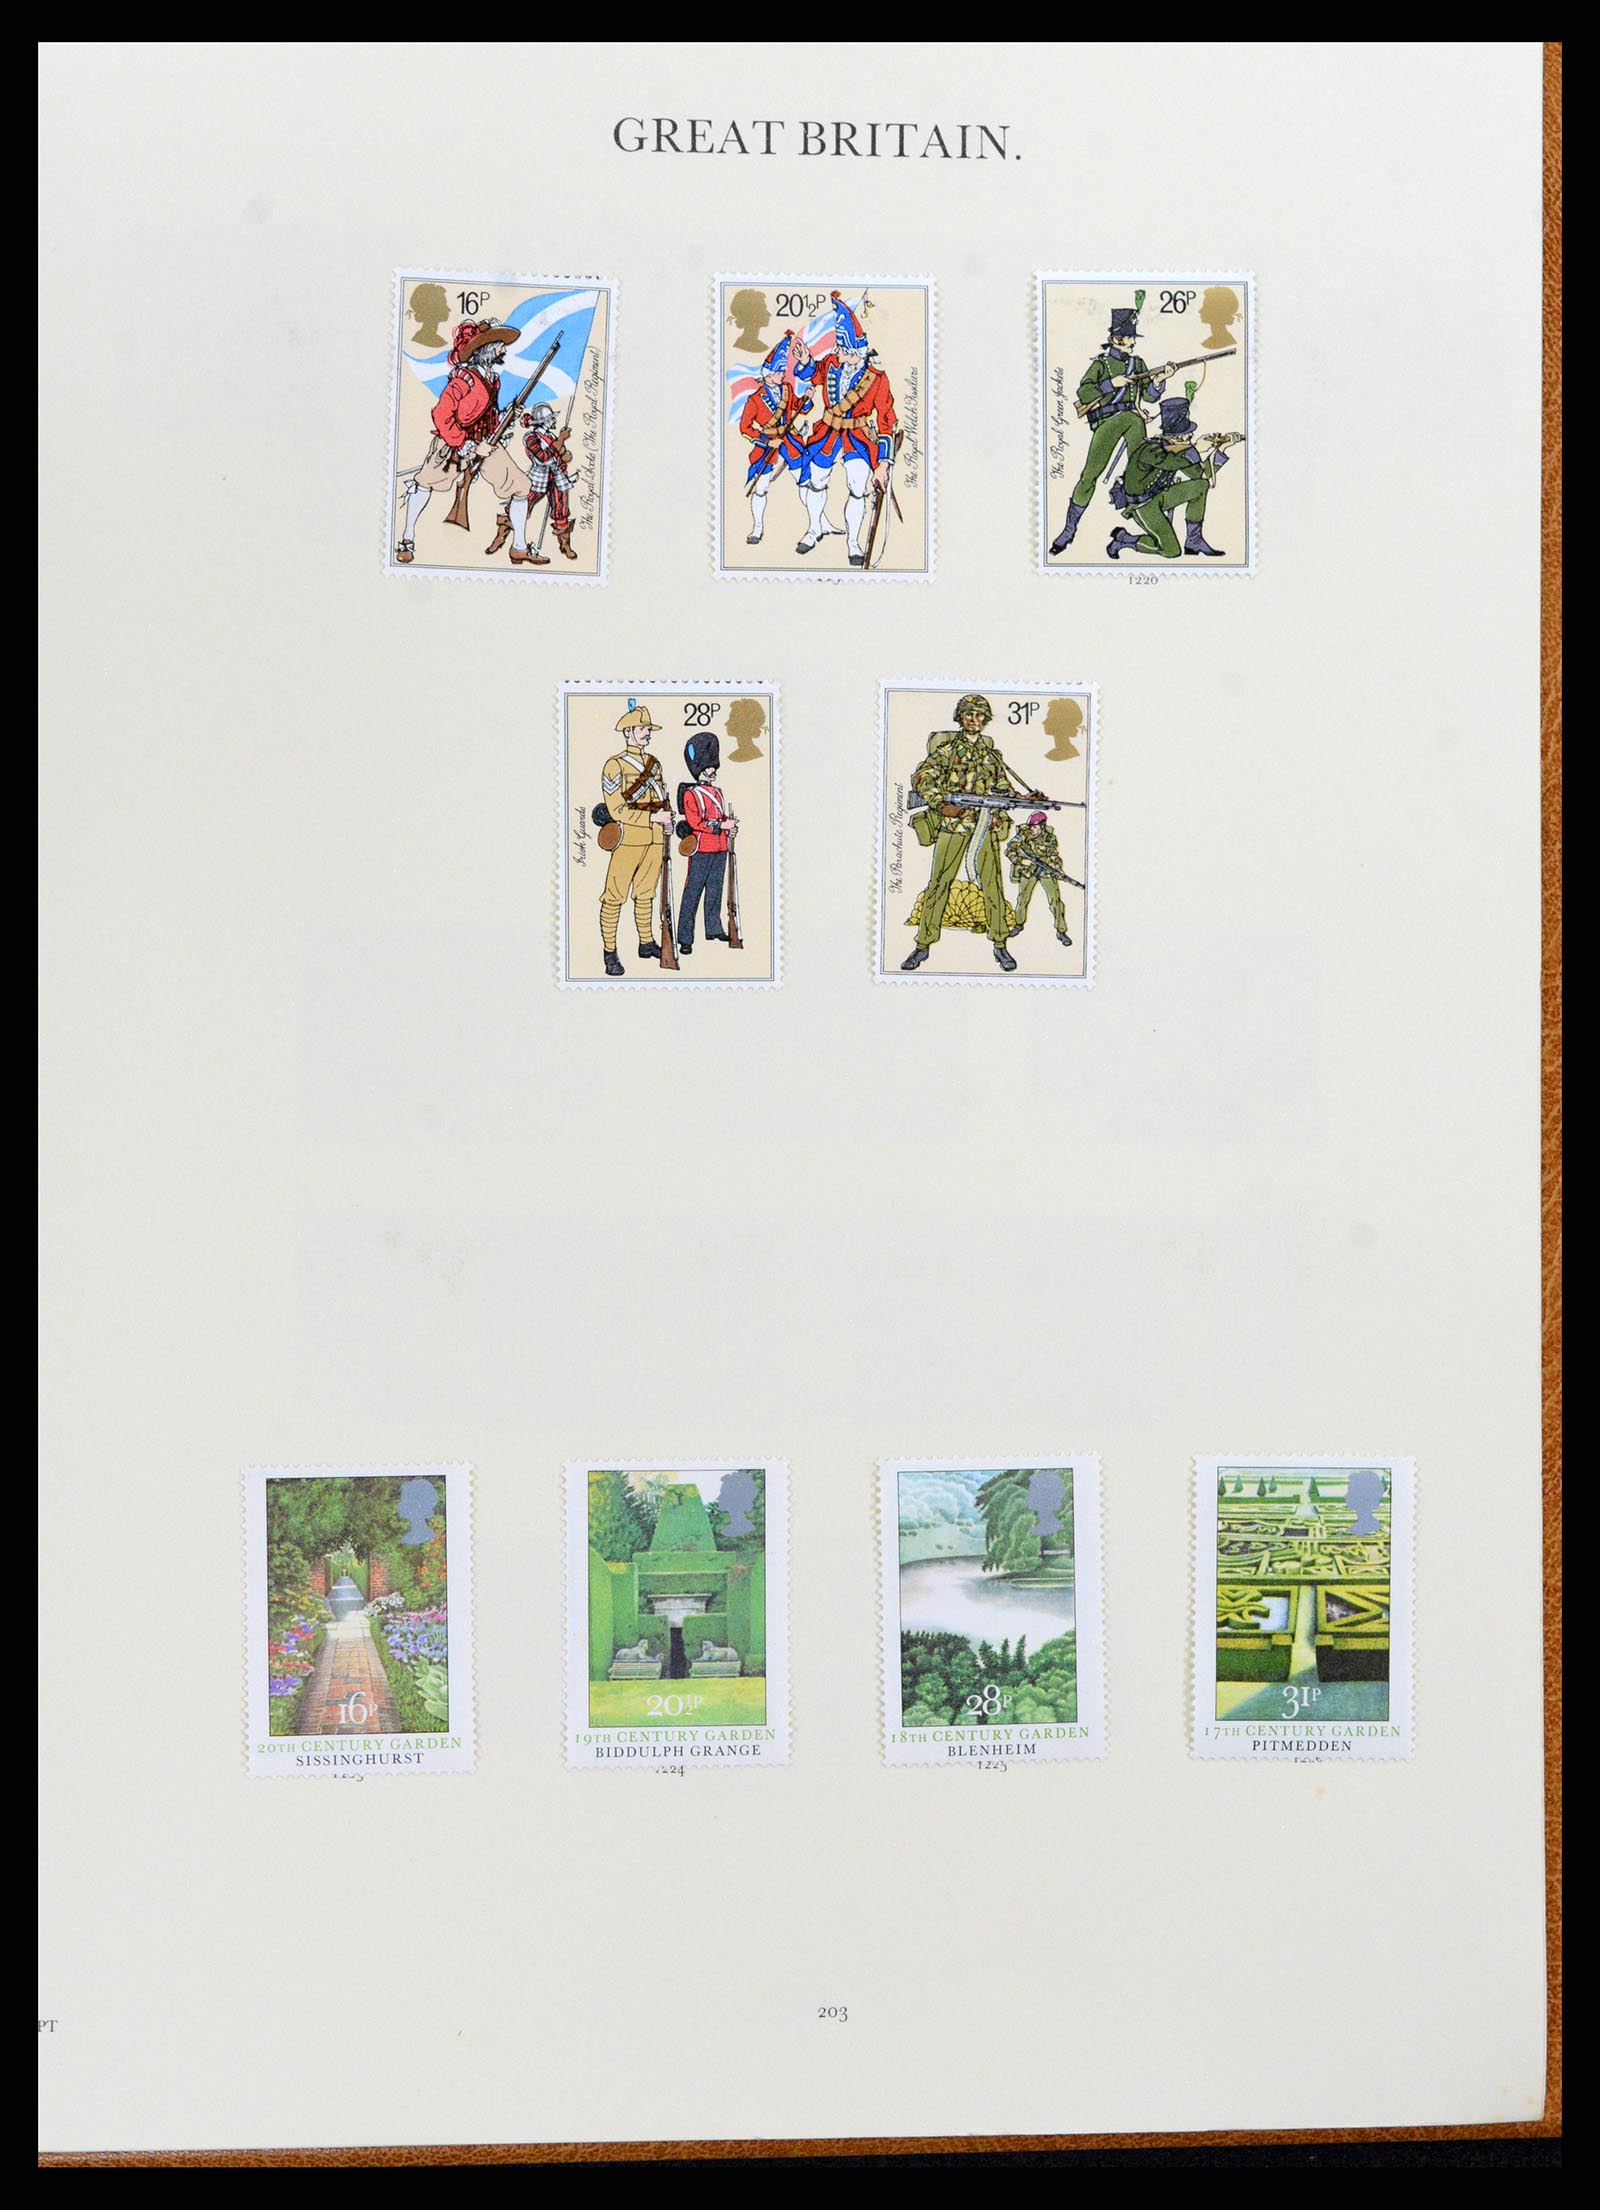 37759 093 - Stamp collection 37759 Great Britain and Colonies in Europe 1858-2005.